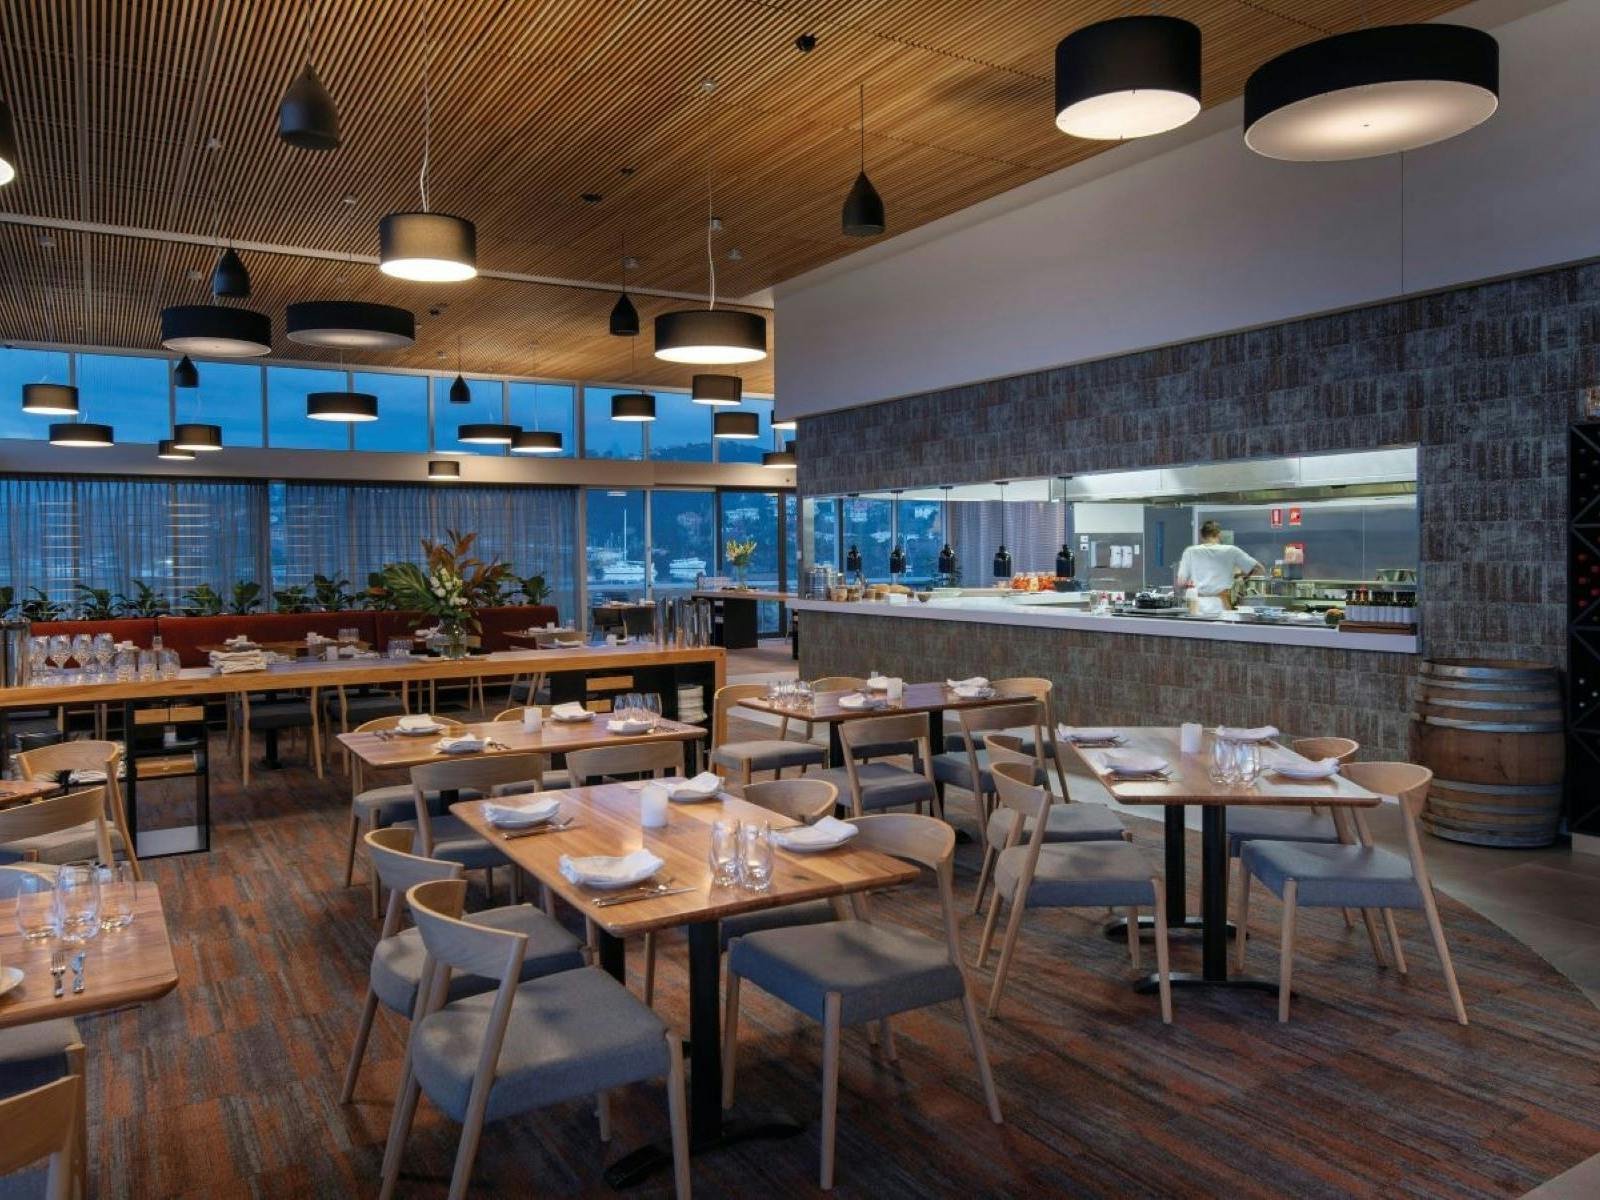 Interior of Grain of the Silo restaurant with a view of the open kitchen & tables set for dinner